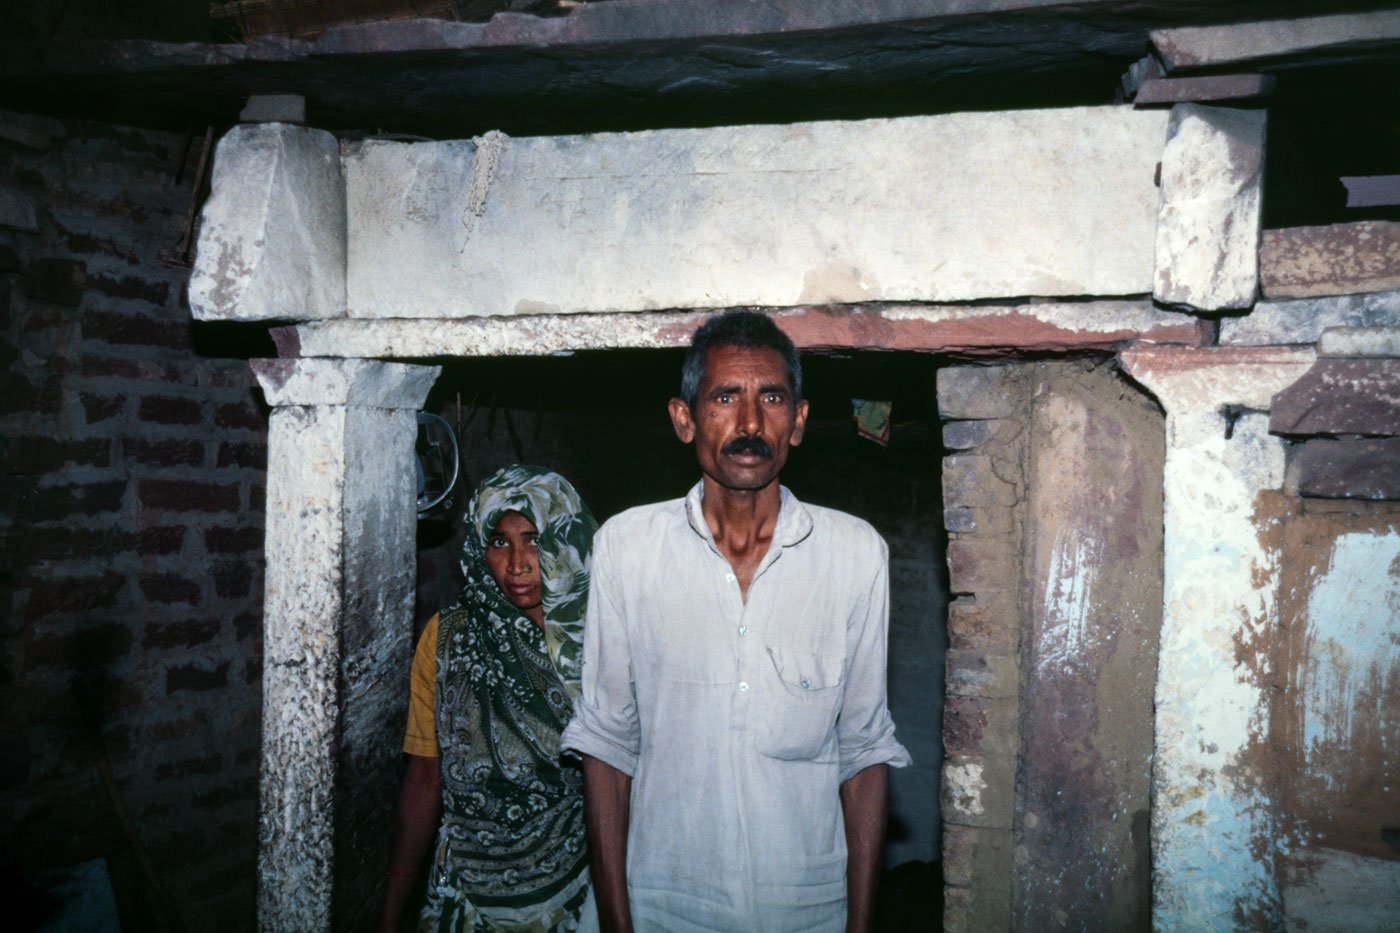 Mangi Lai Jatav and his wife in Naksoda village in Dholpur district